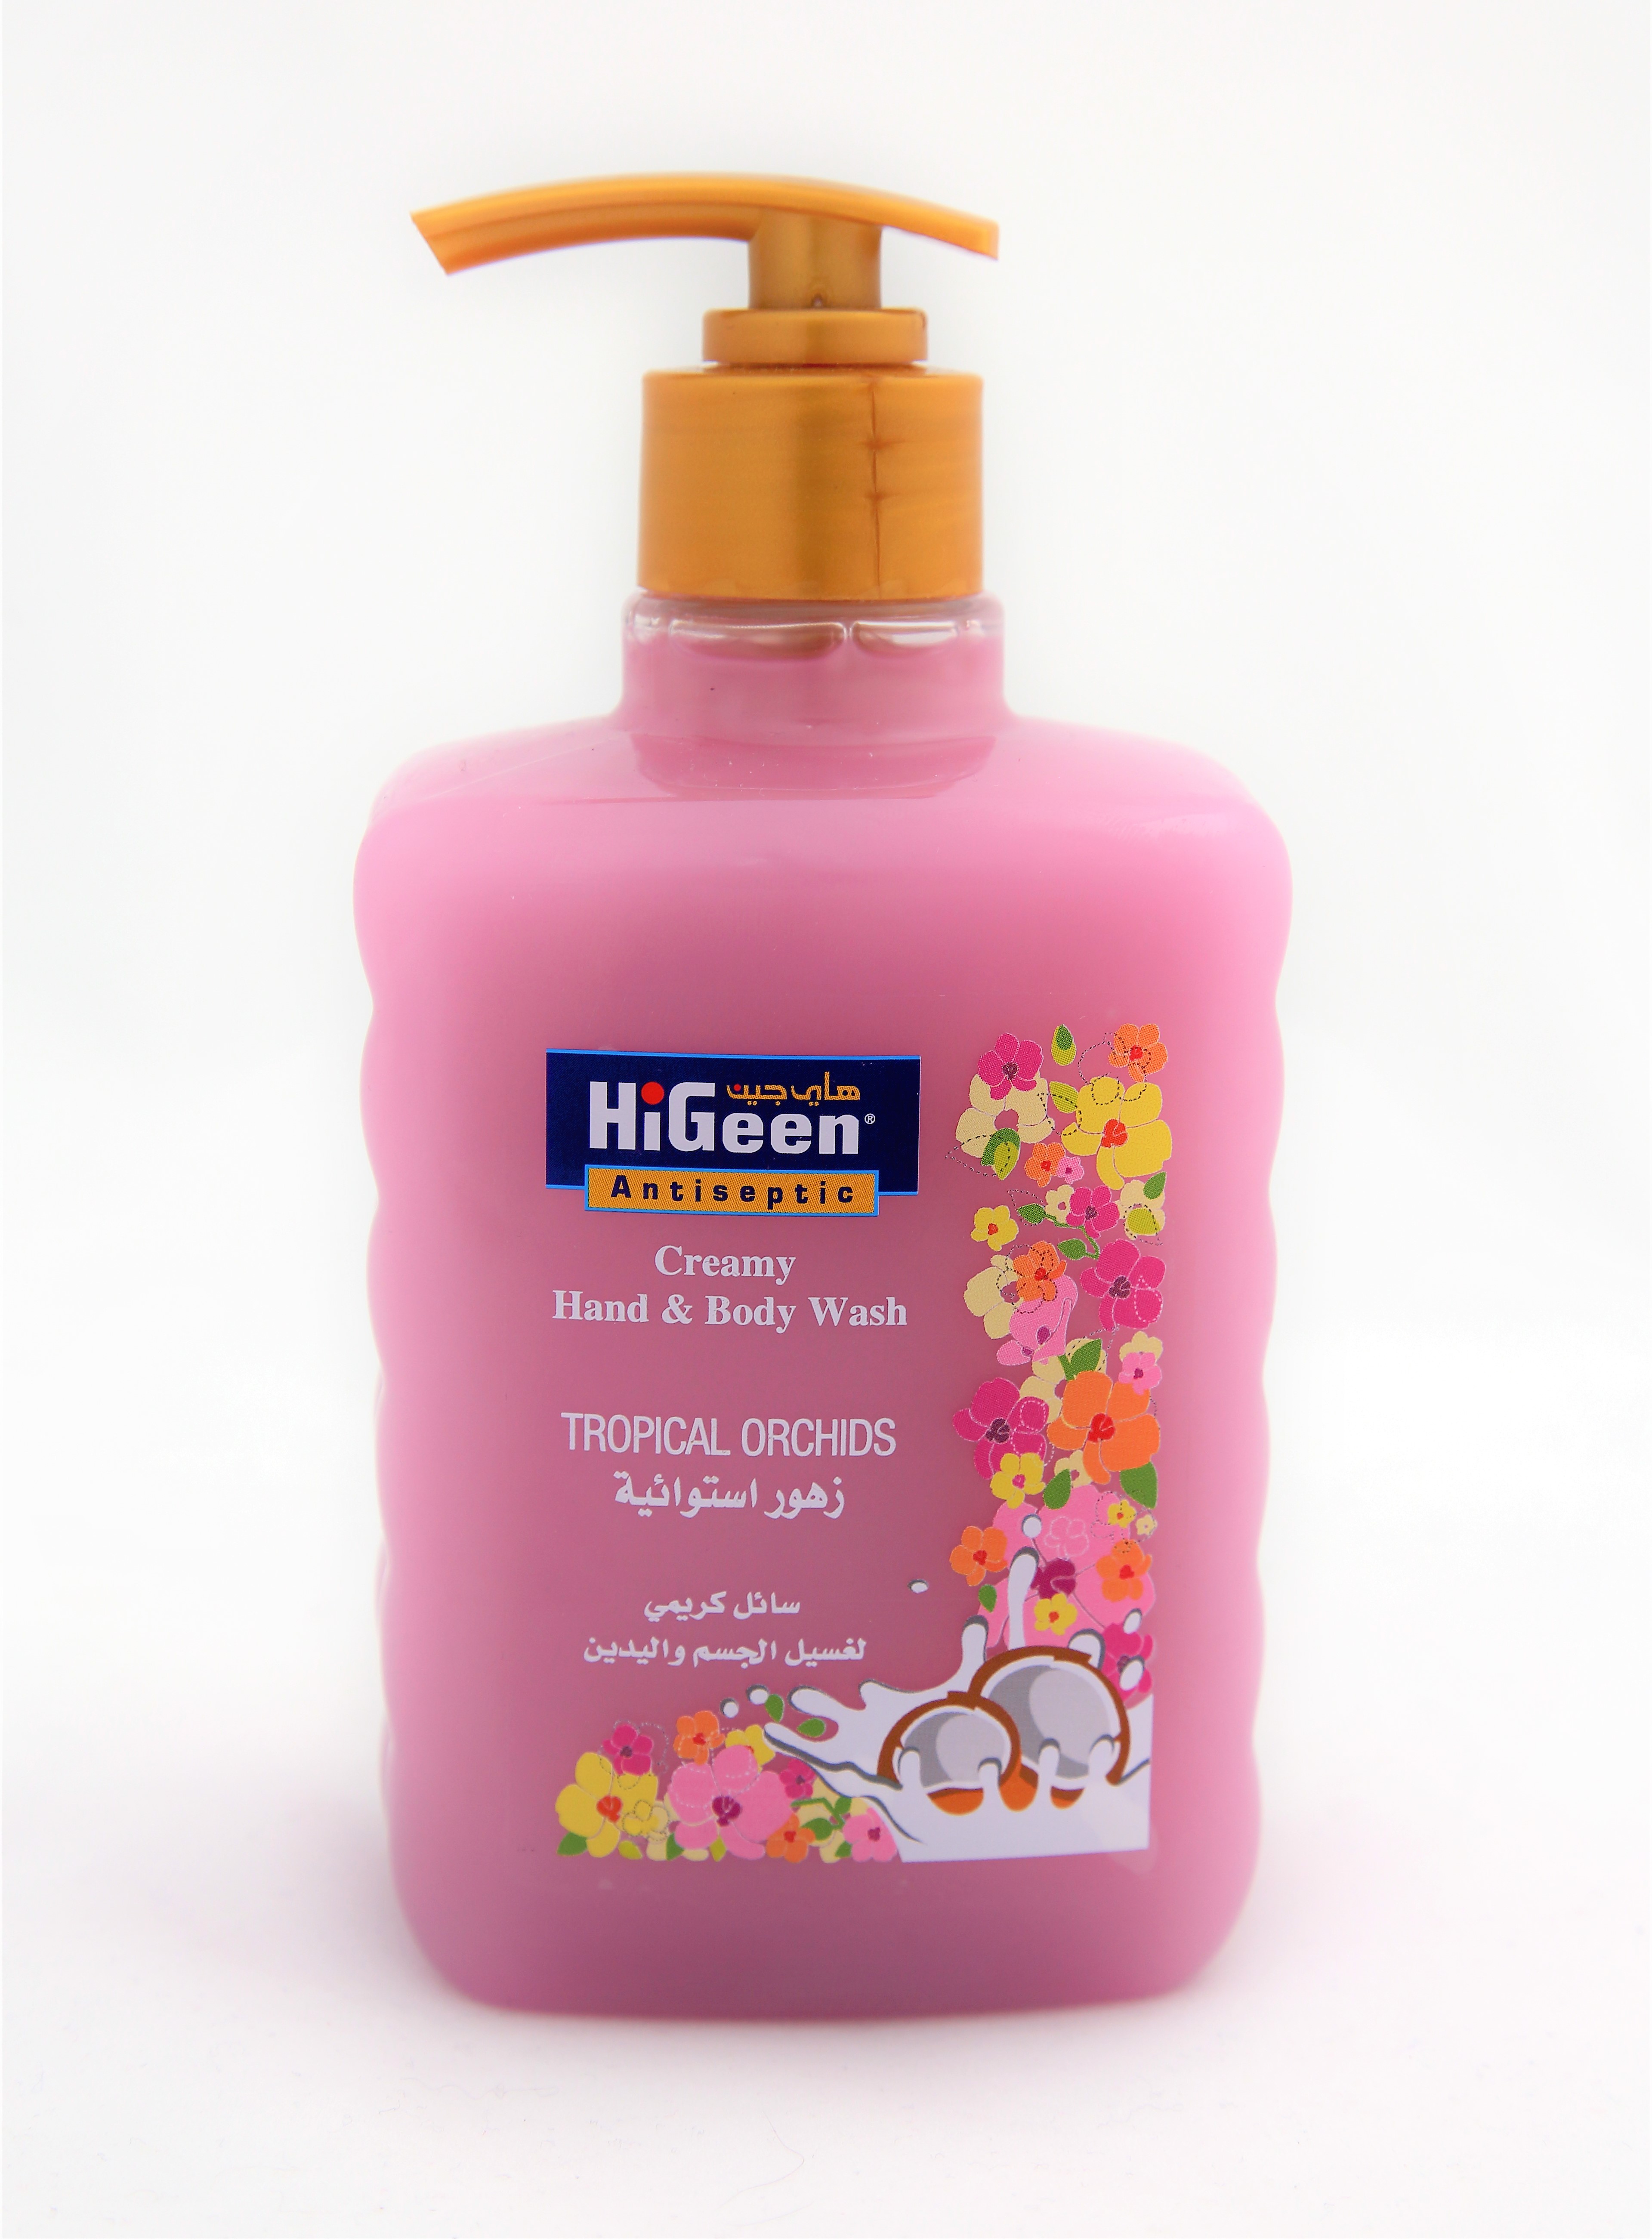 HiGeen Creamy Hand & Body Wash Tropical Orchids